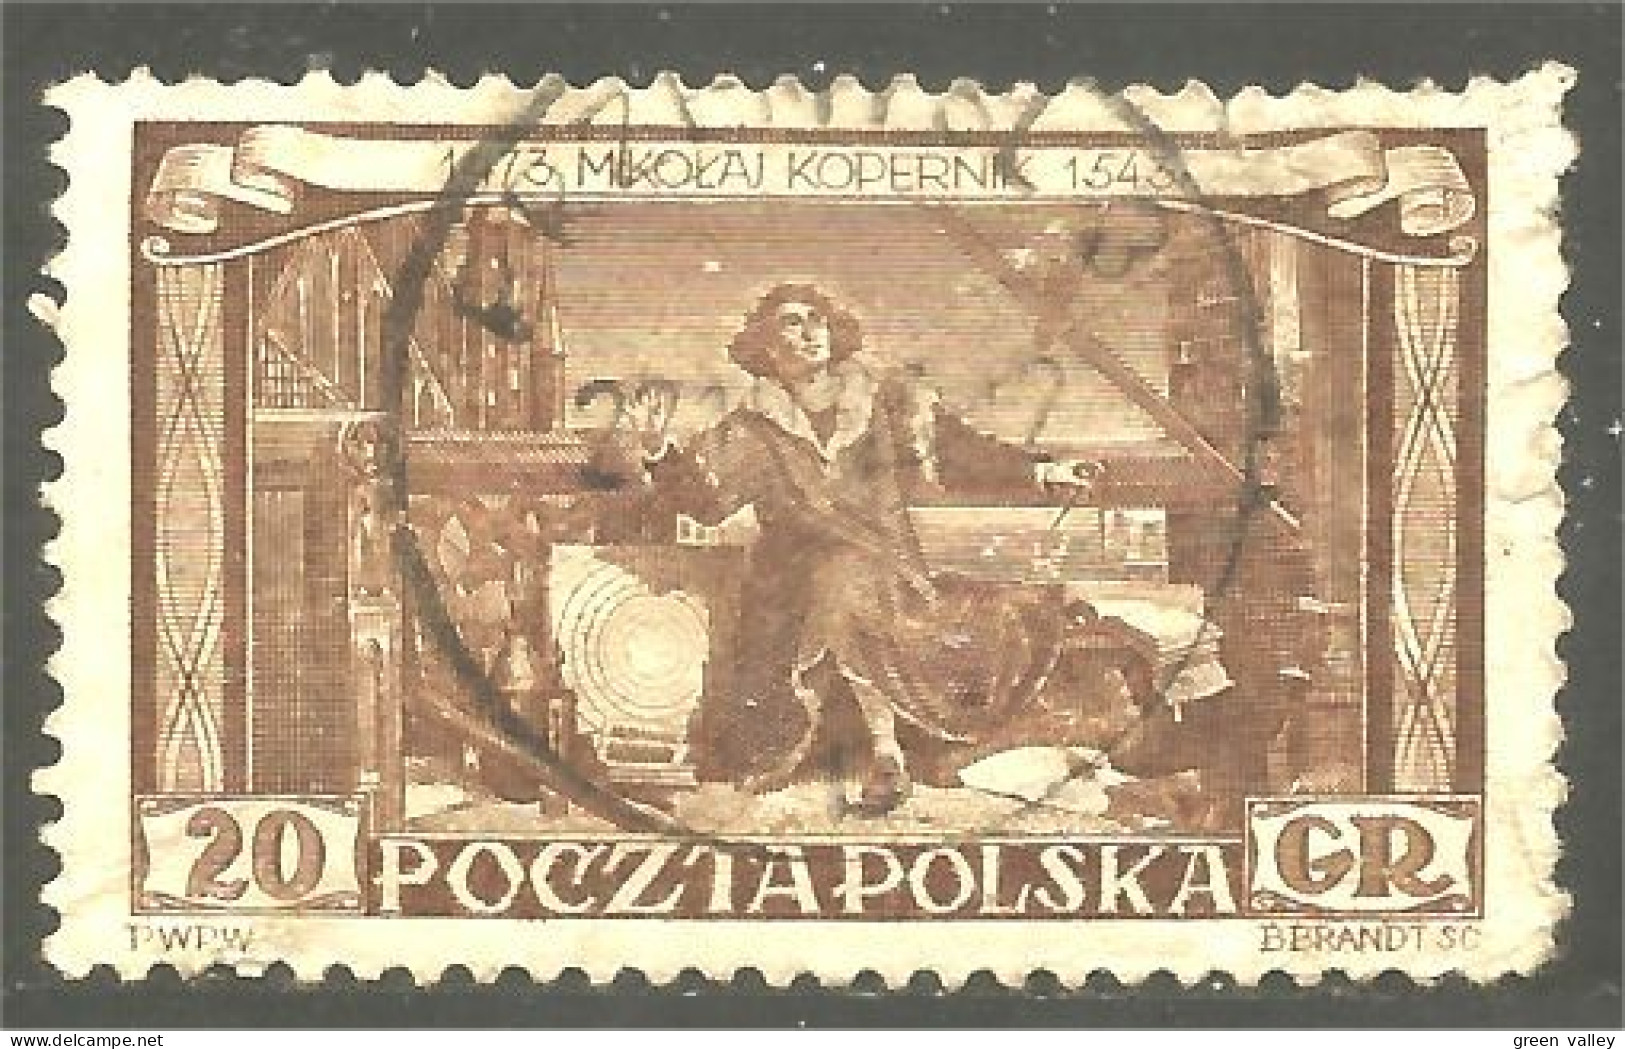 740 Pologne Nicolas Copernic Astronome Astronomie Astronomy (POL-355a) - Used Stamps